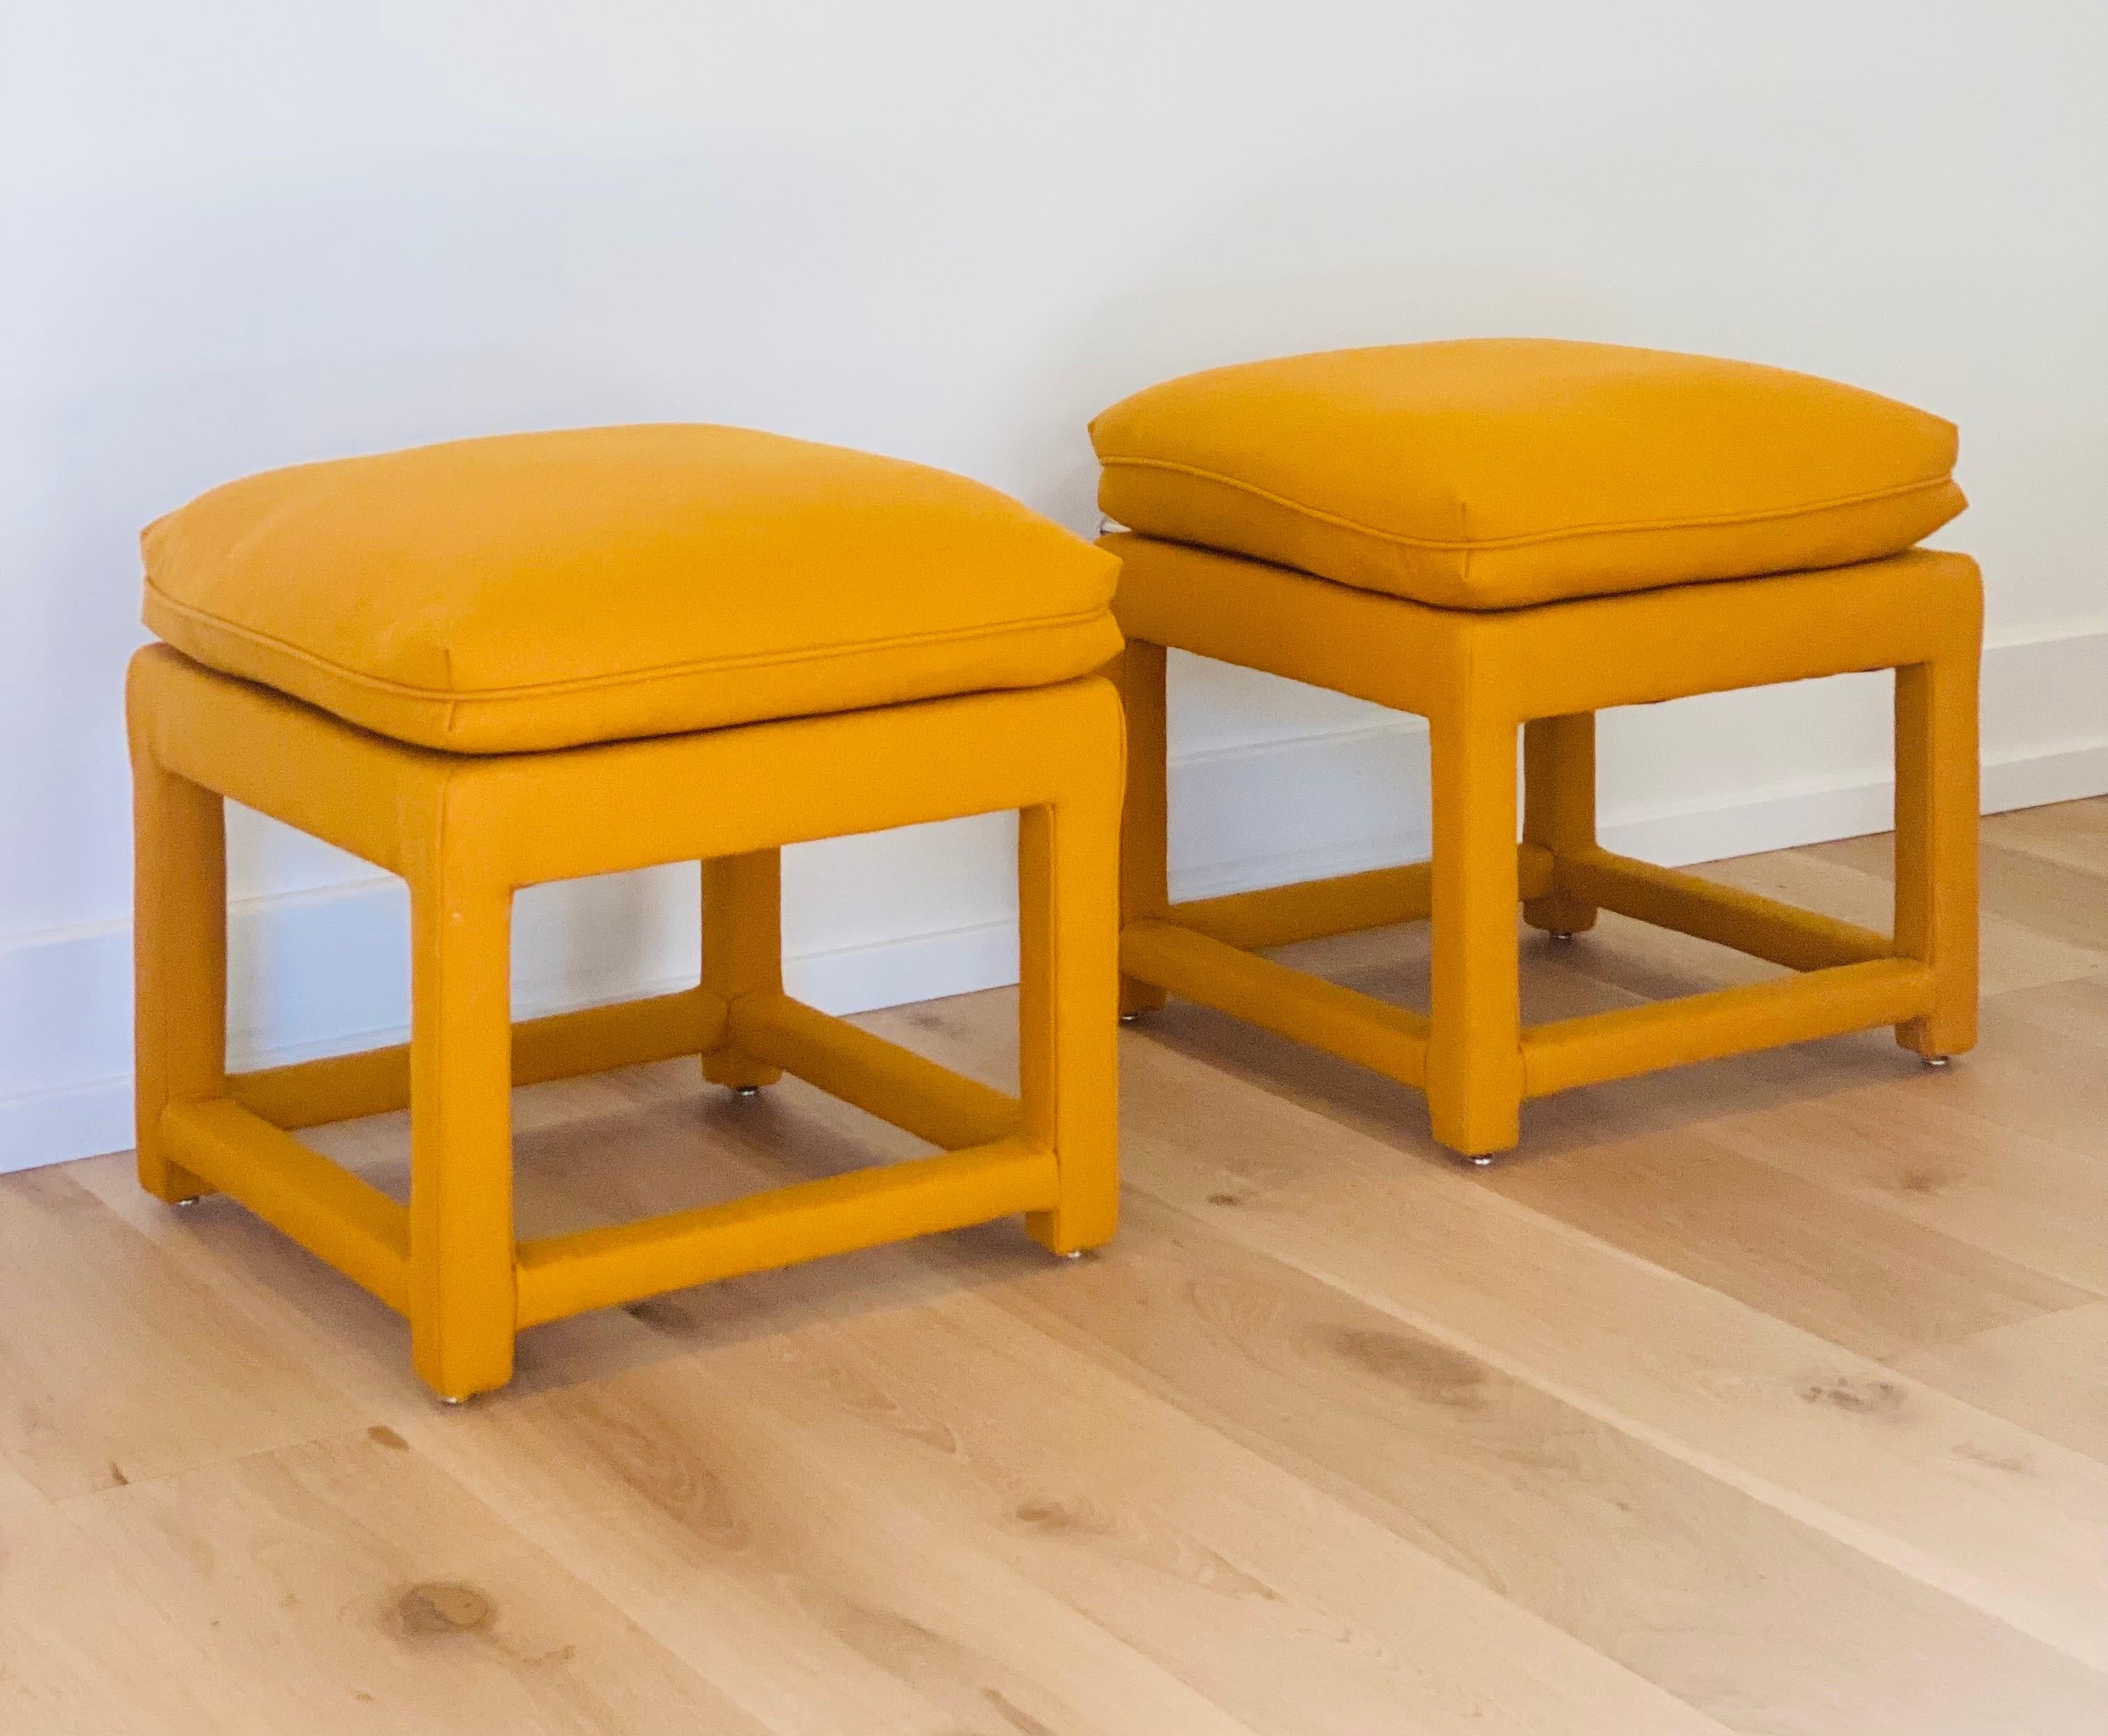 We are very pleased to offer a chic, vintage pair of Milo Baughman style ottomans, circa the 1970s. Layer a space or add extra seating with these eye-catching ottomans wrapped in a new Maharam wool, mustard color fabric. In excellent condition and